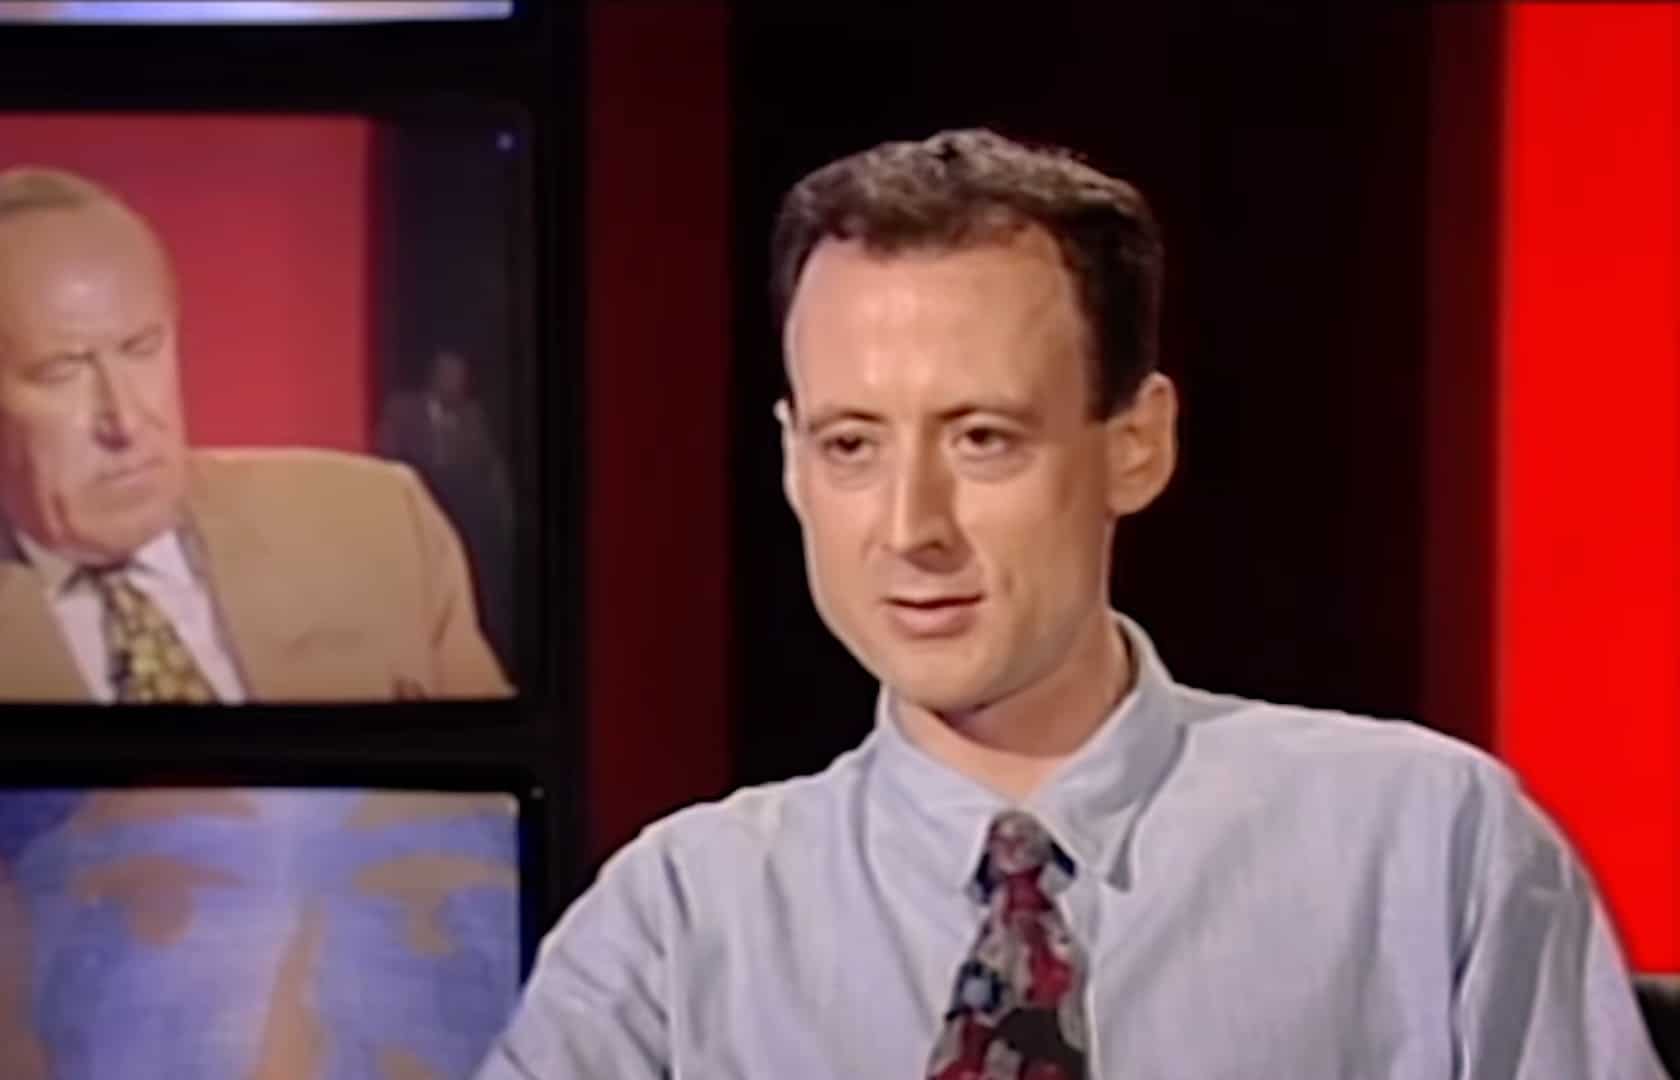 Peter Tatchell on a television programme